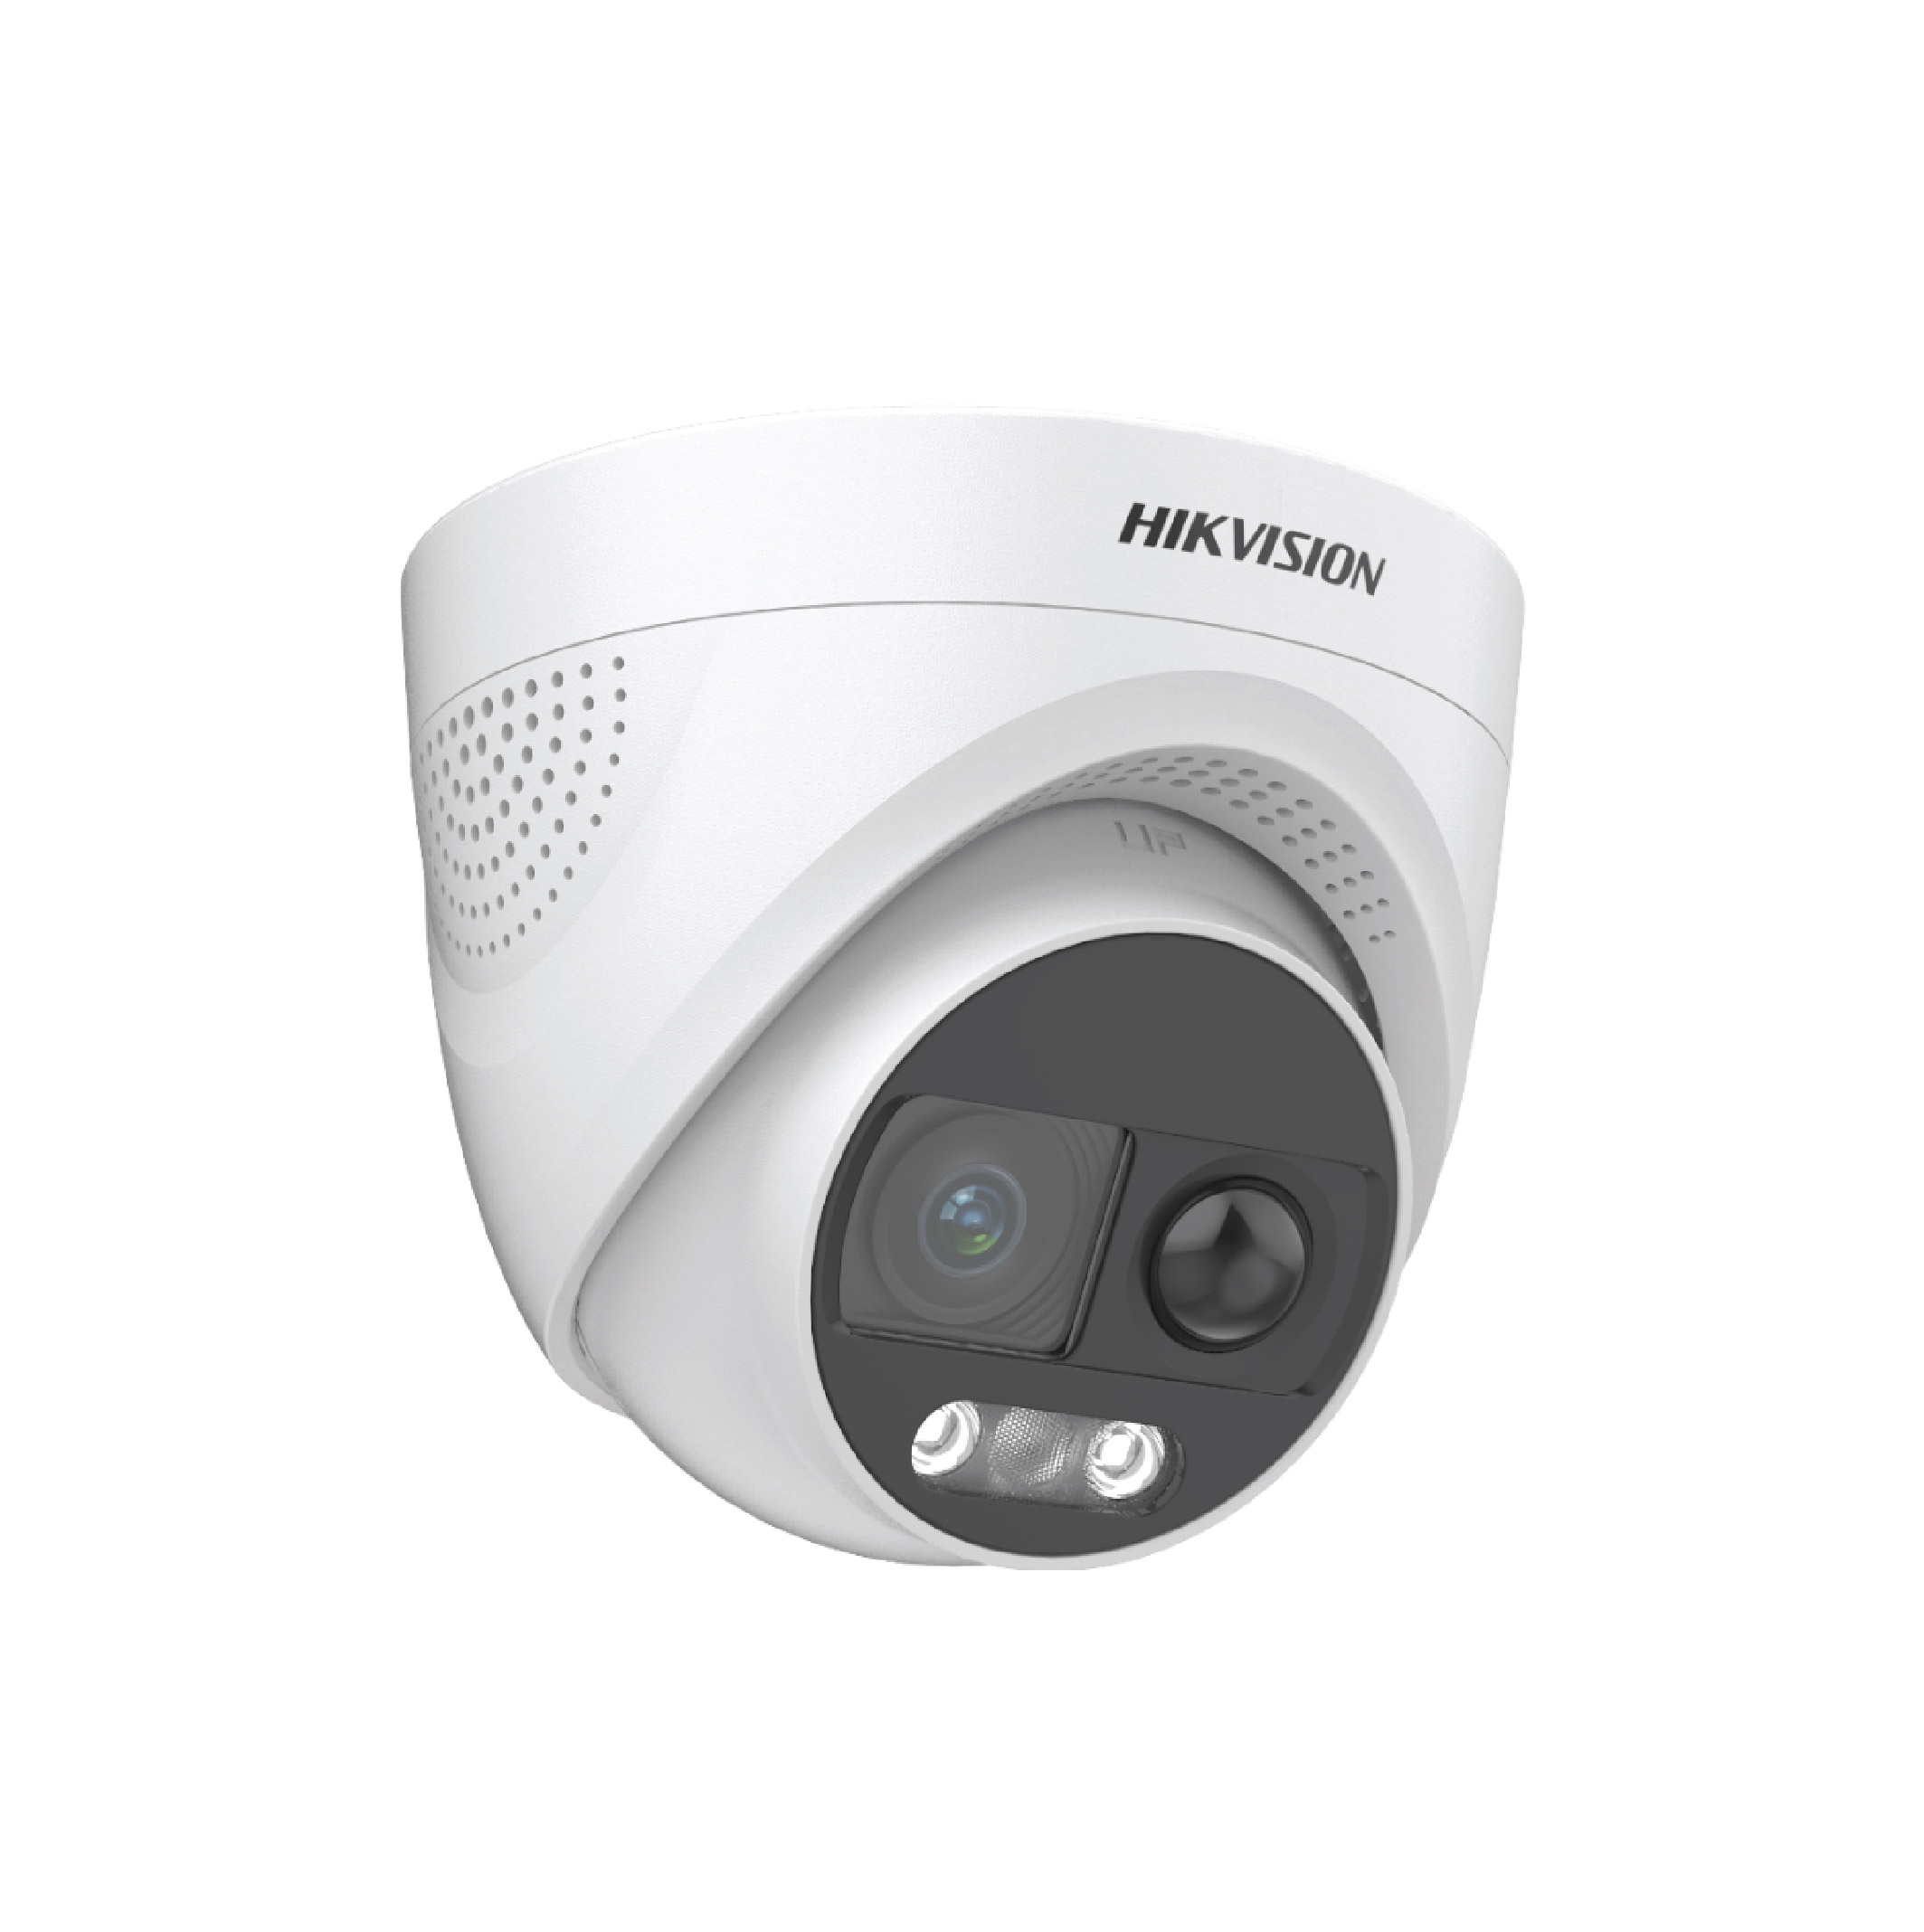 HIKVISION DS-2CE72D0T-PIRXF Turbo HD Camera